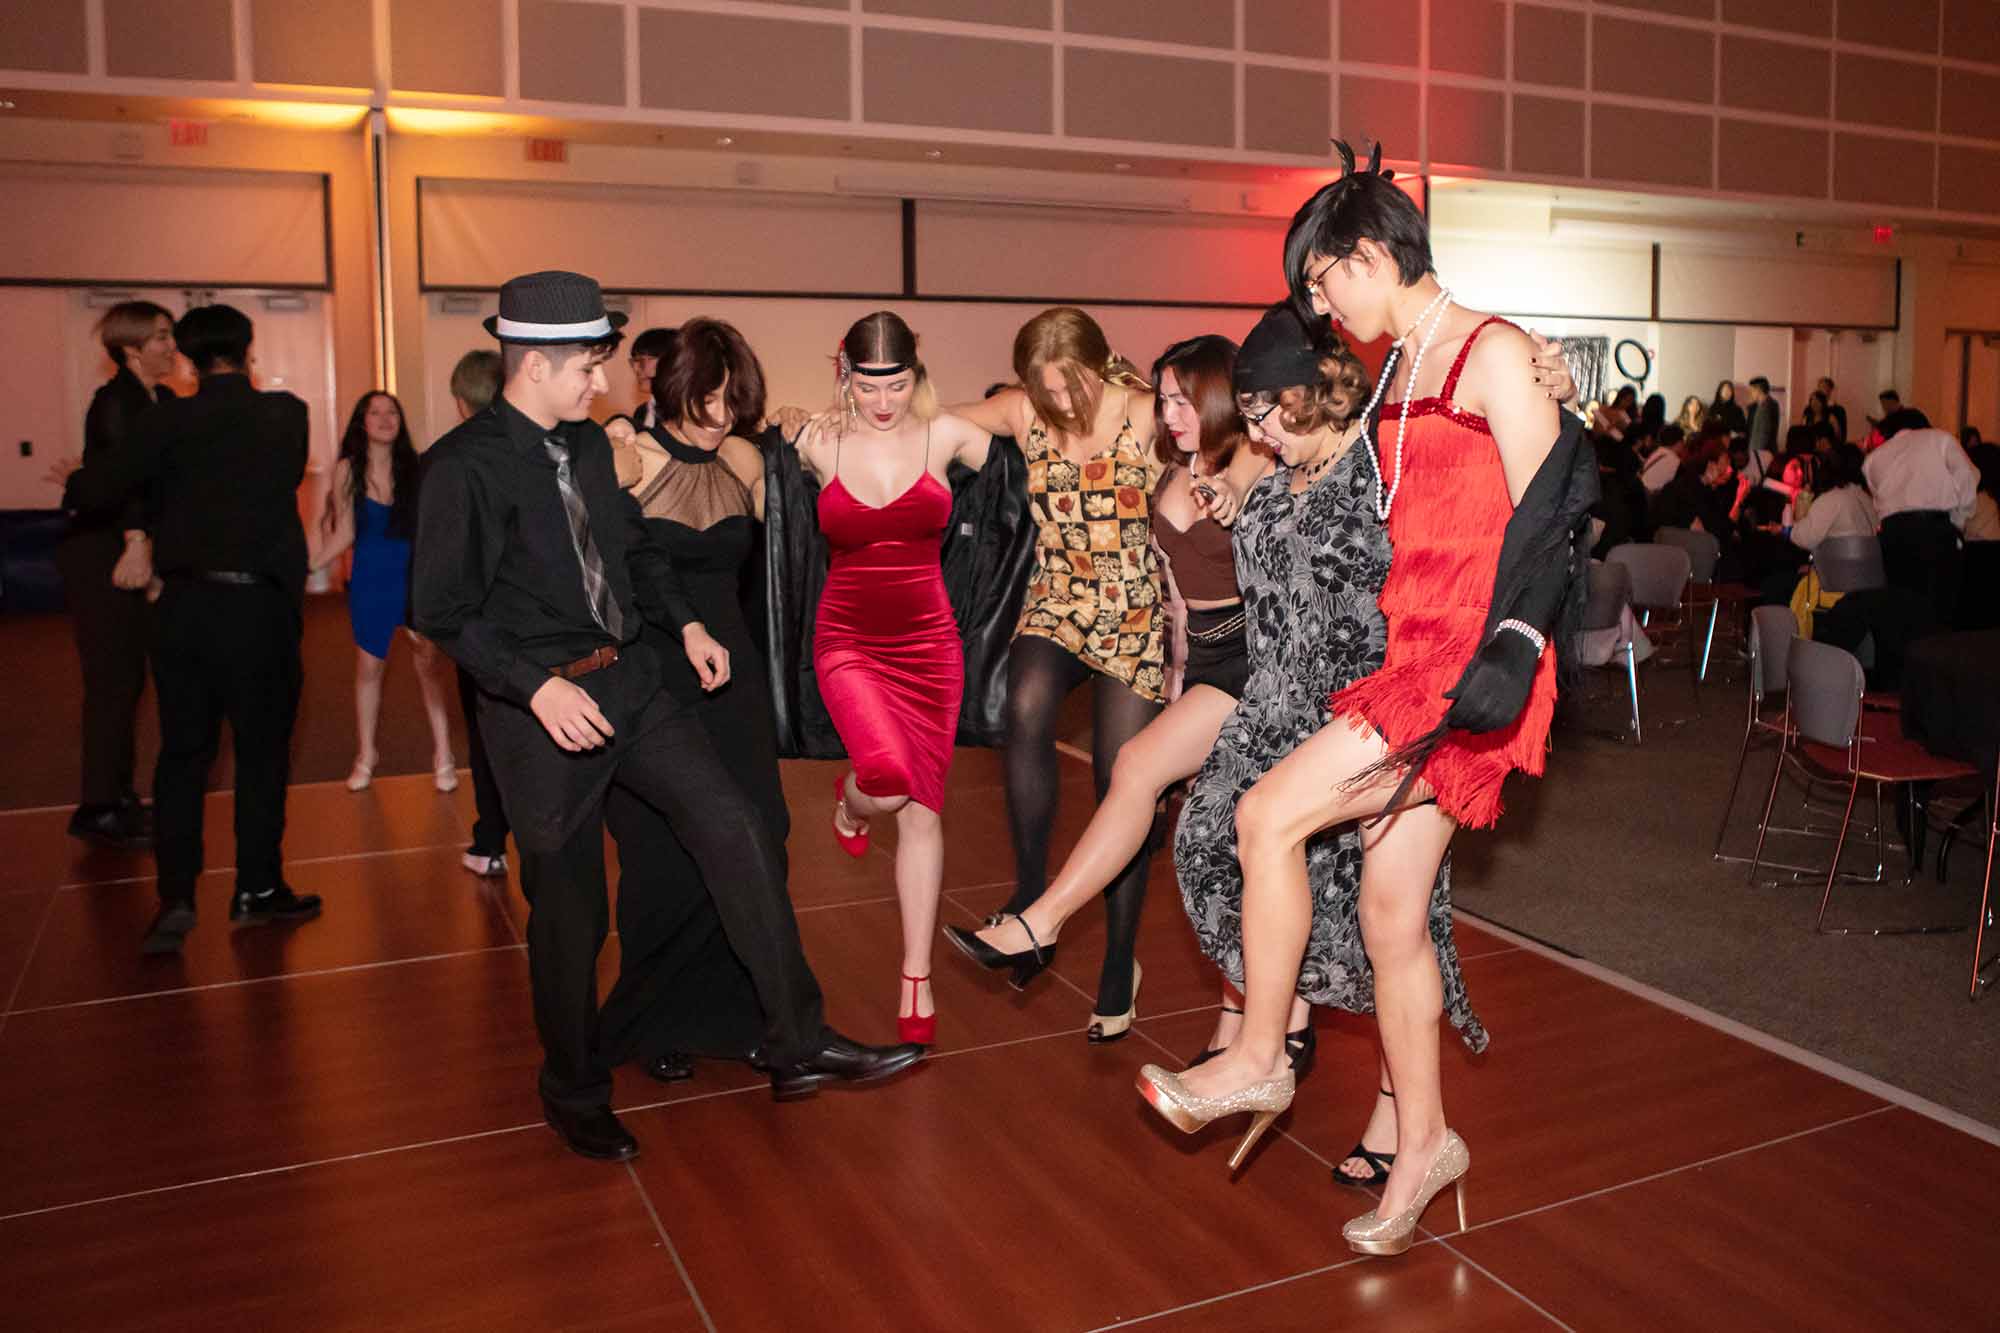 People in semi-formal 1920s attire dancing at an indoor event